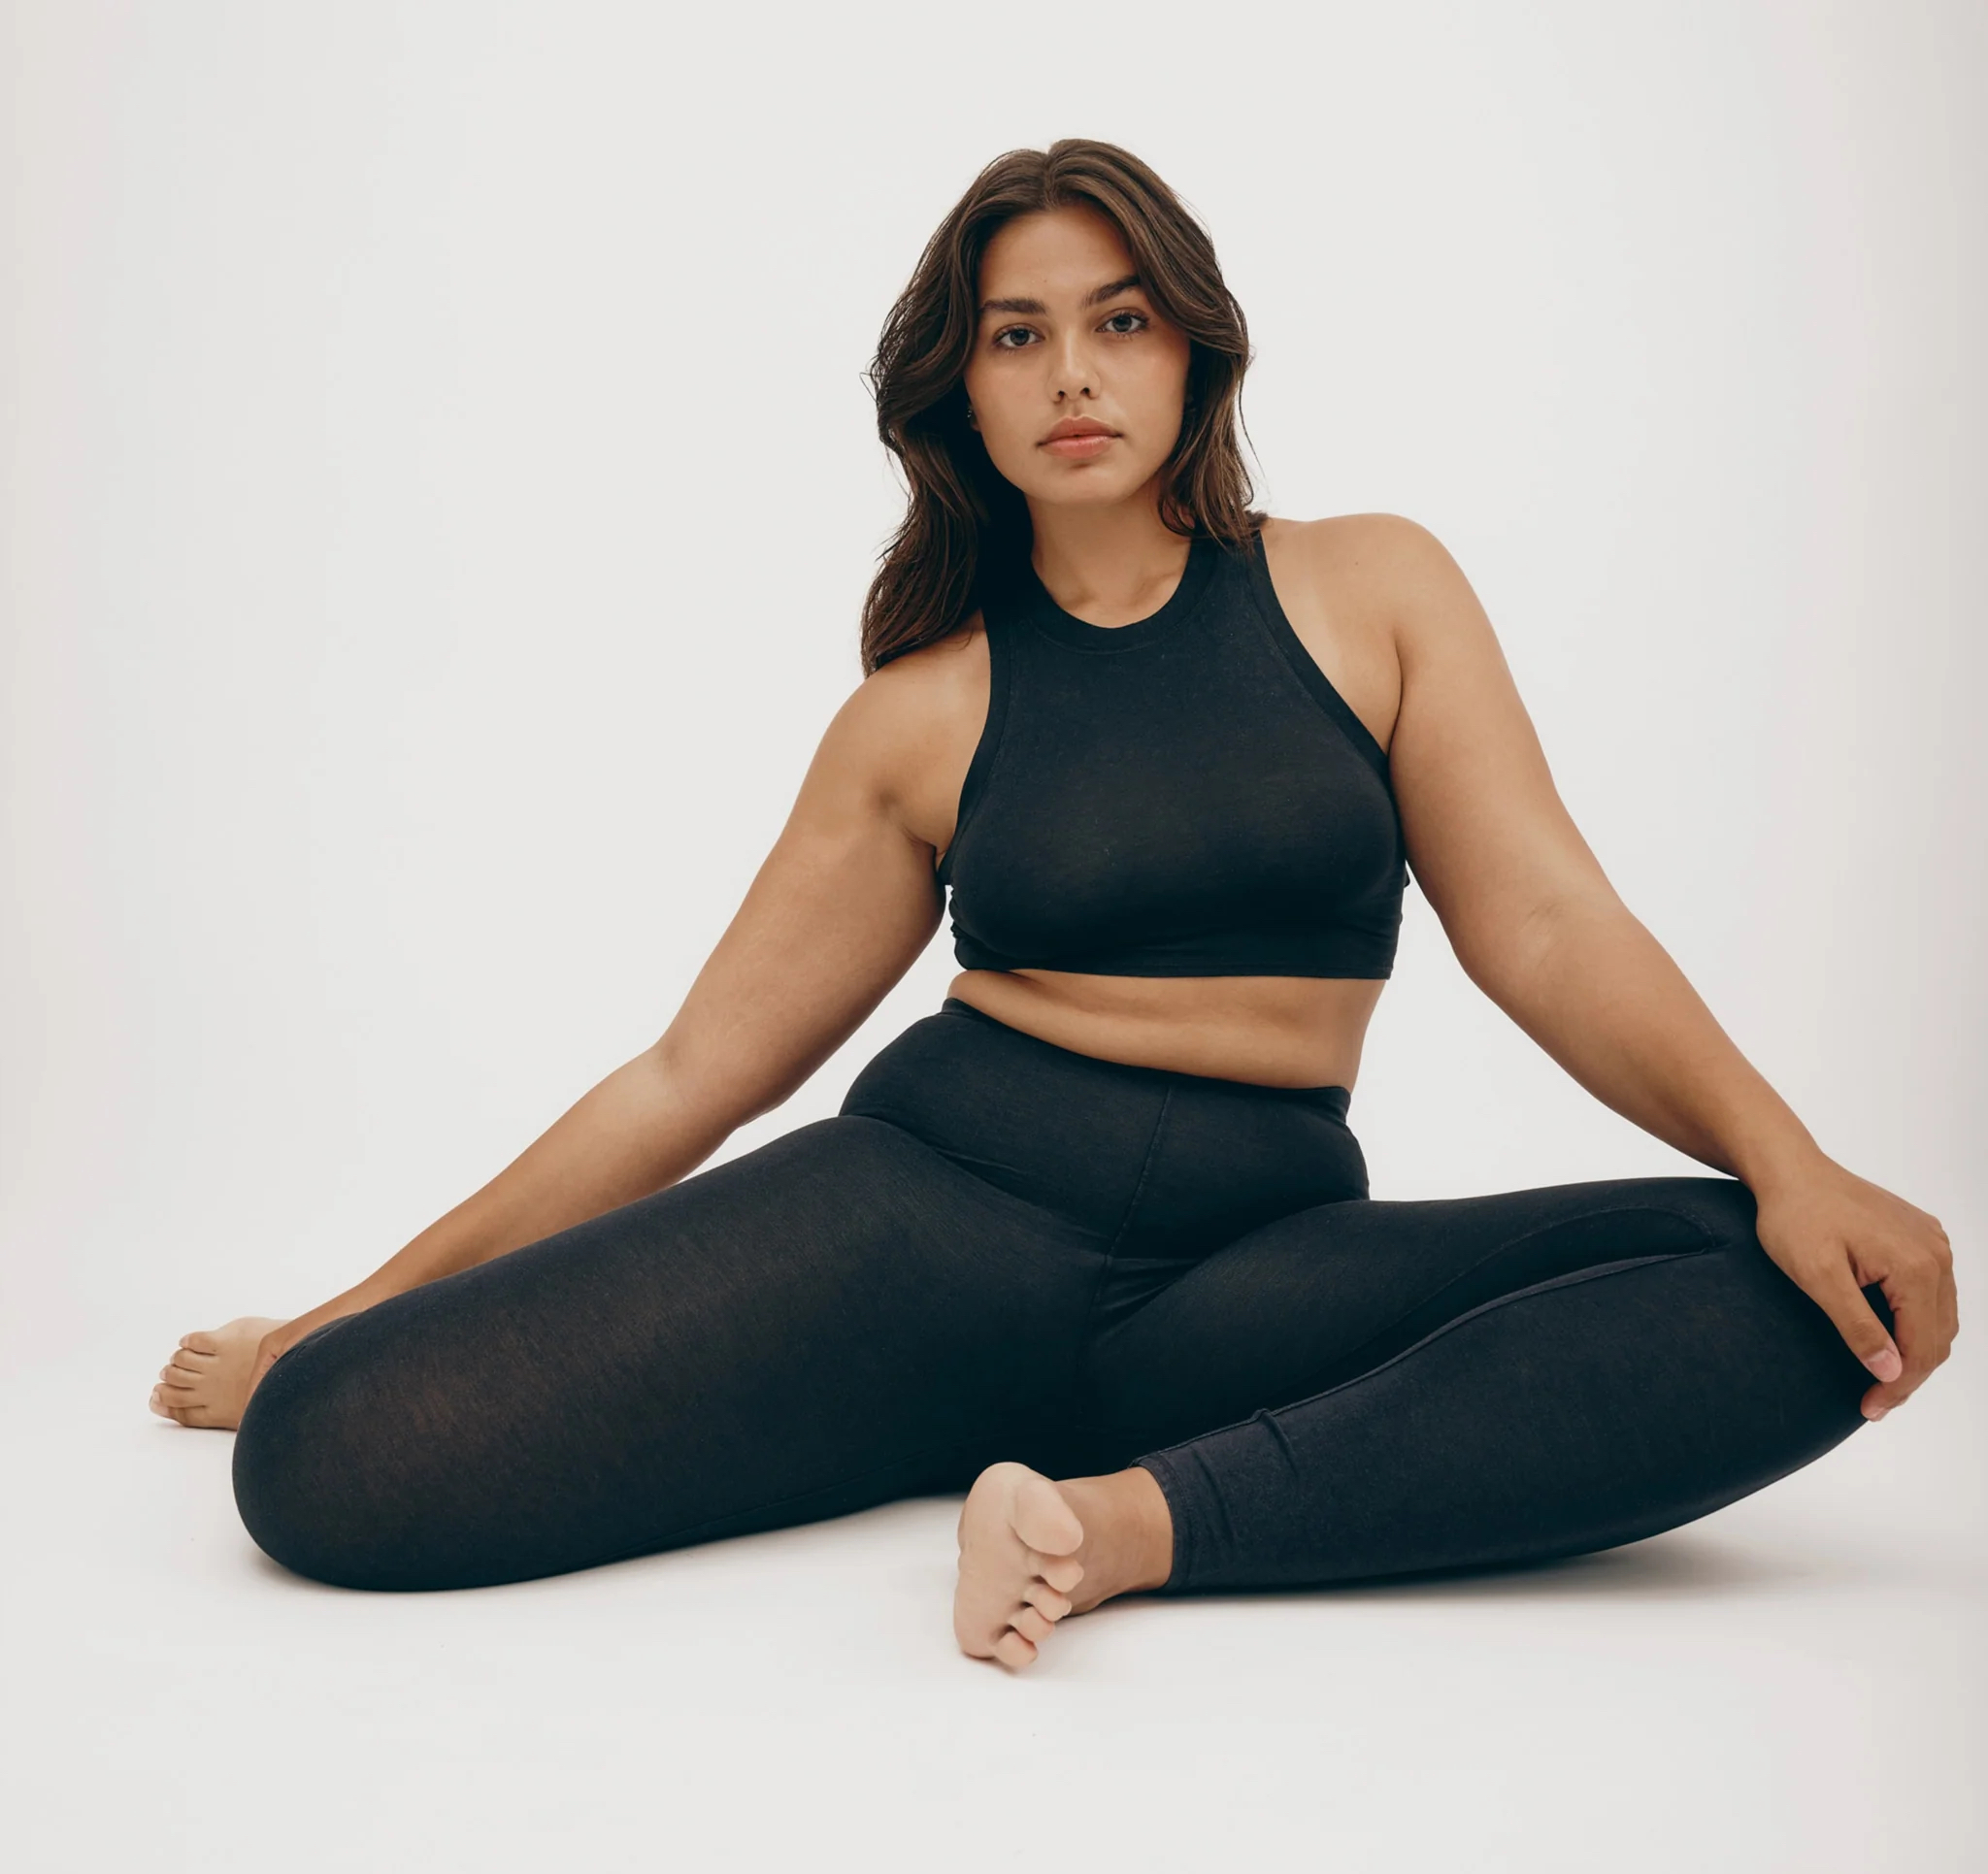 7 Organic Cotton Leggings And Yoga Pants For Everyday Wear - The Good Trade